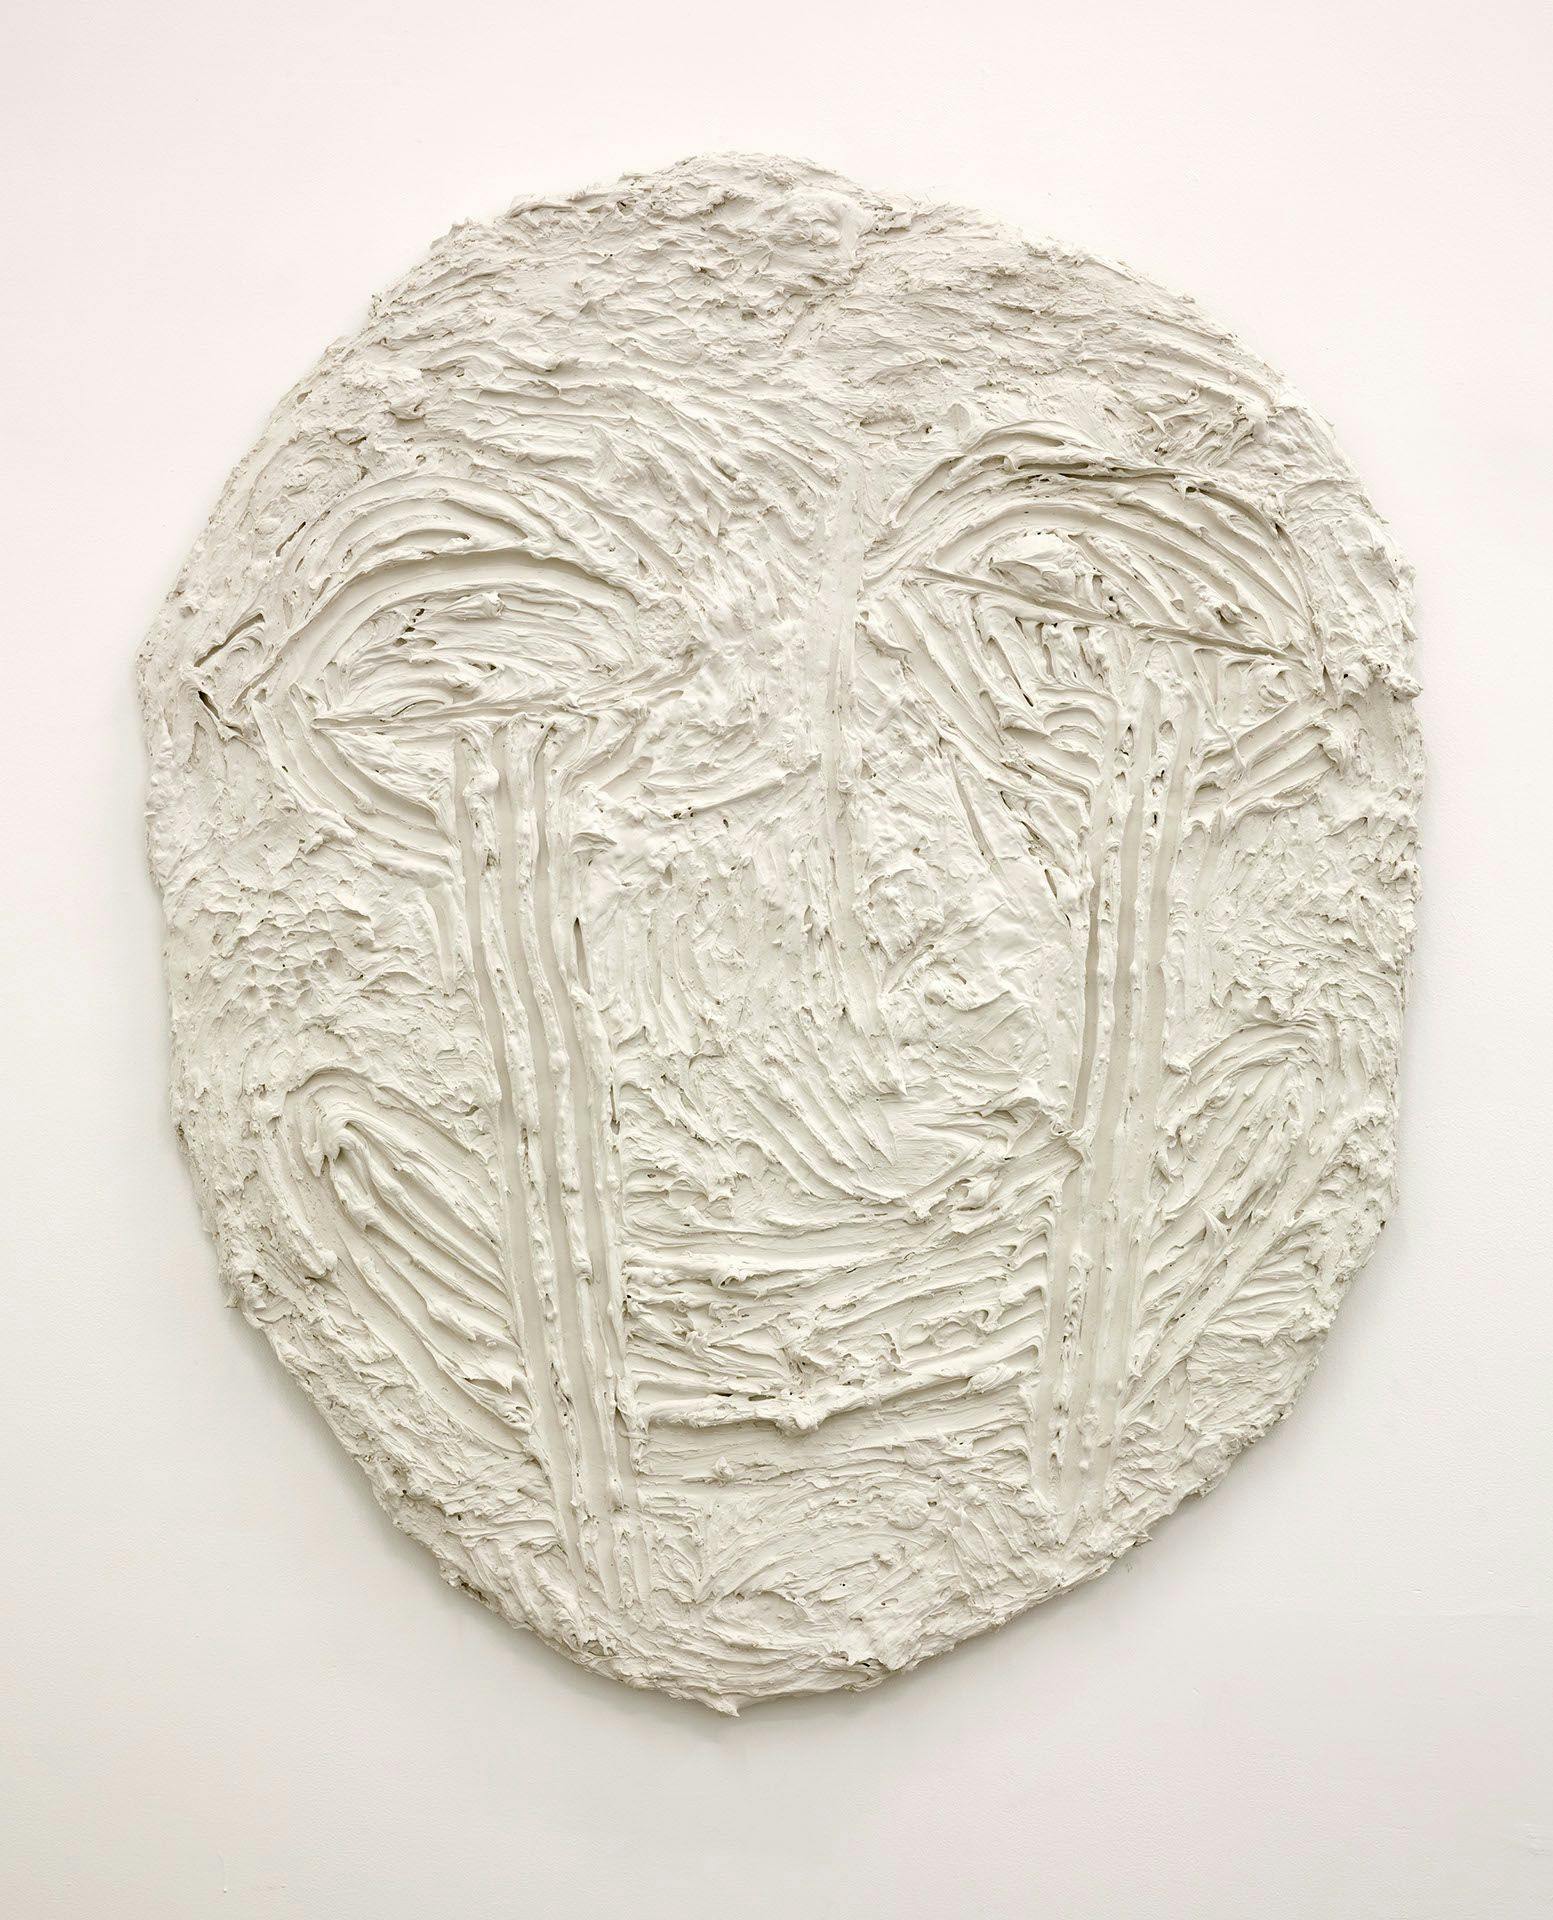 Untitled 3, 2015

plaster, wire, wood

59 x 49 inches